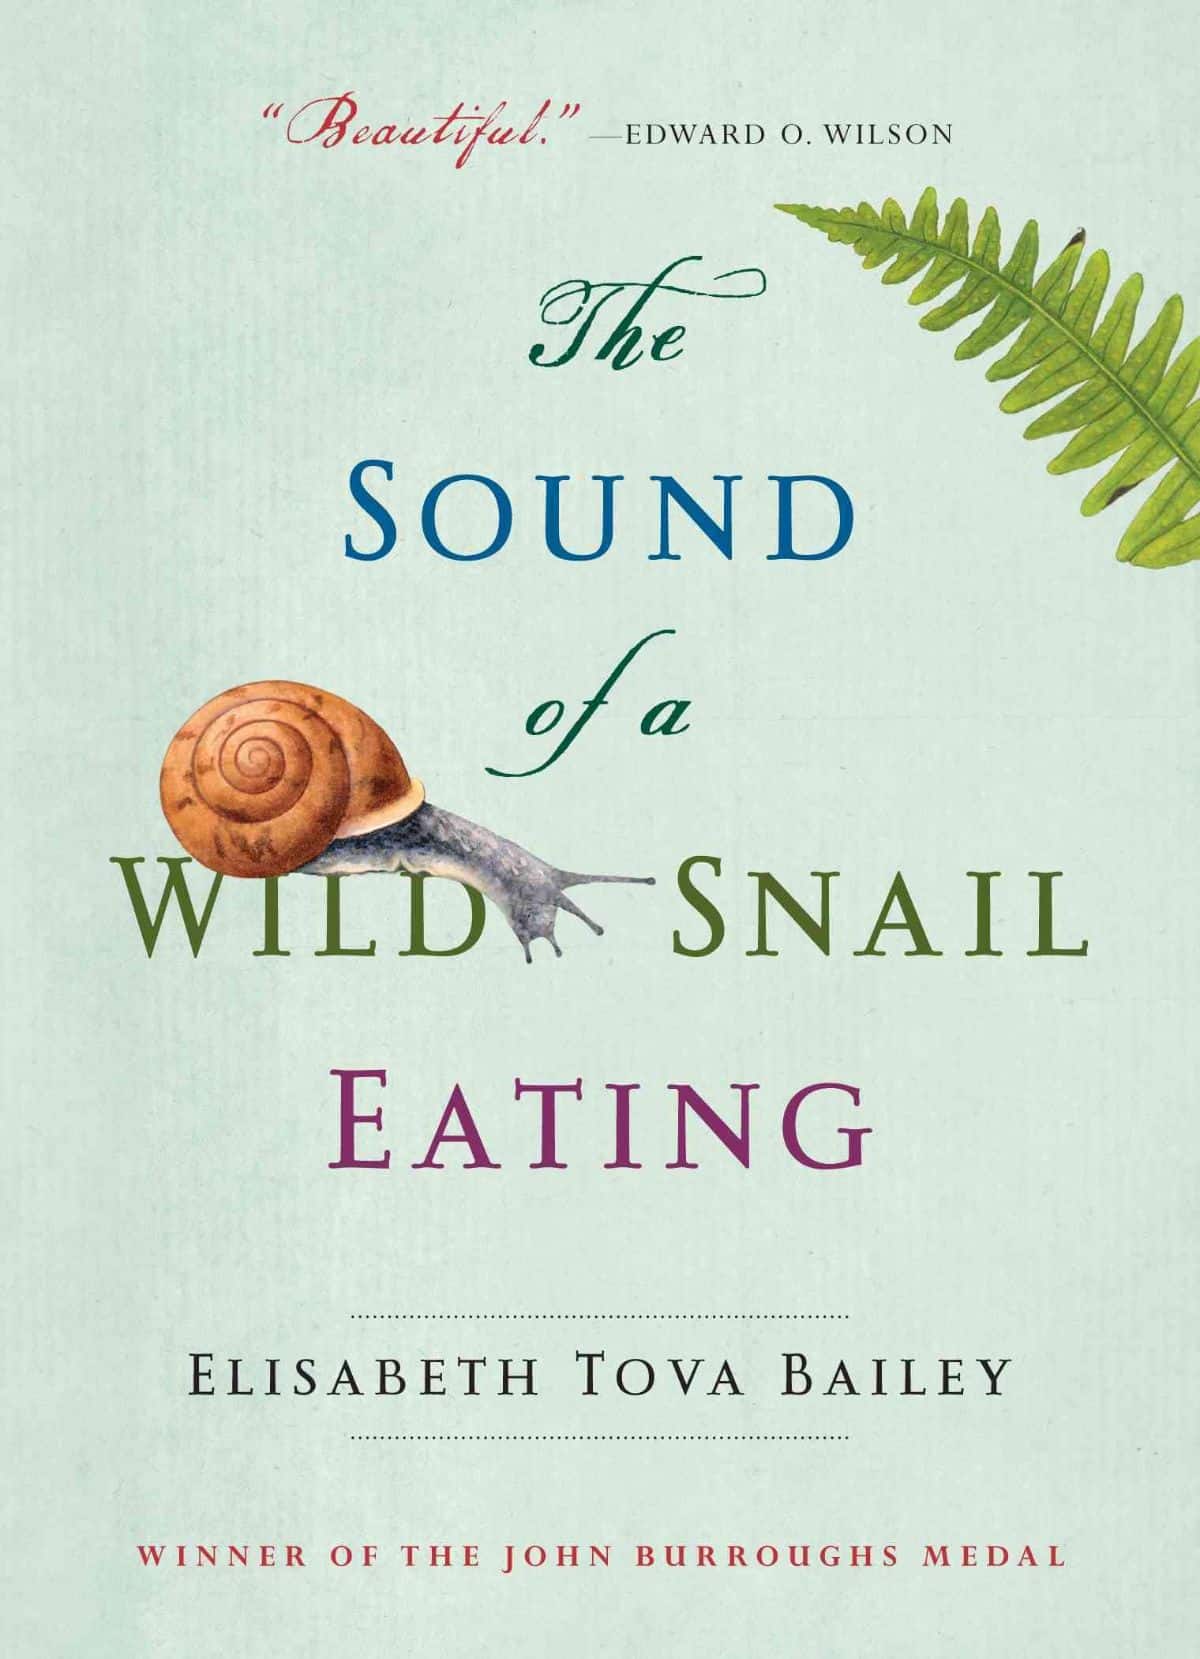 Picture of the cover of The Sound of a Wild Snail Eating by Elisabeth Tova Bailey